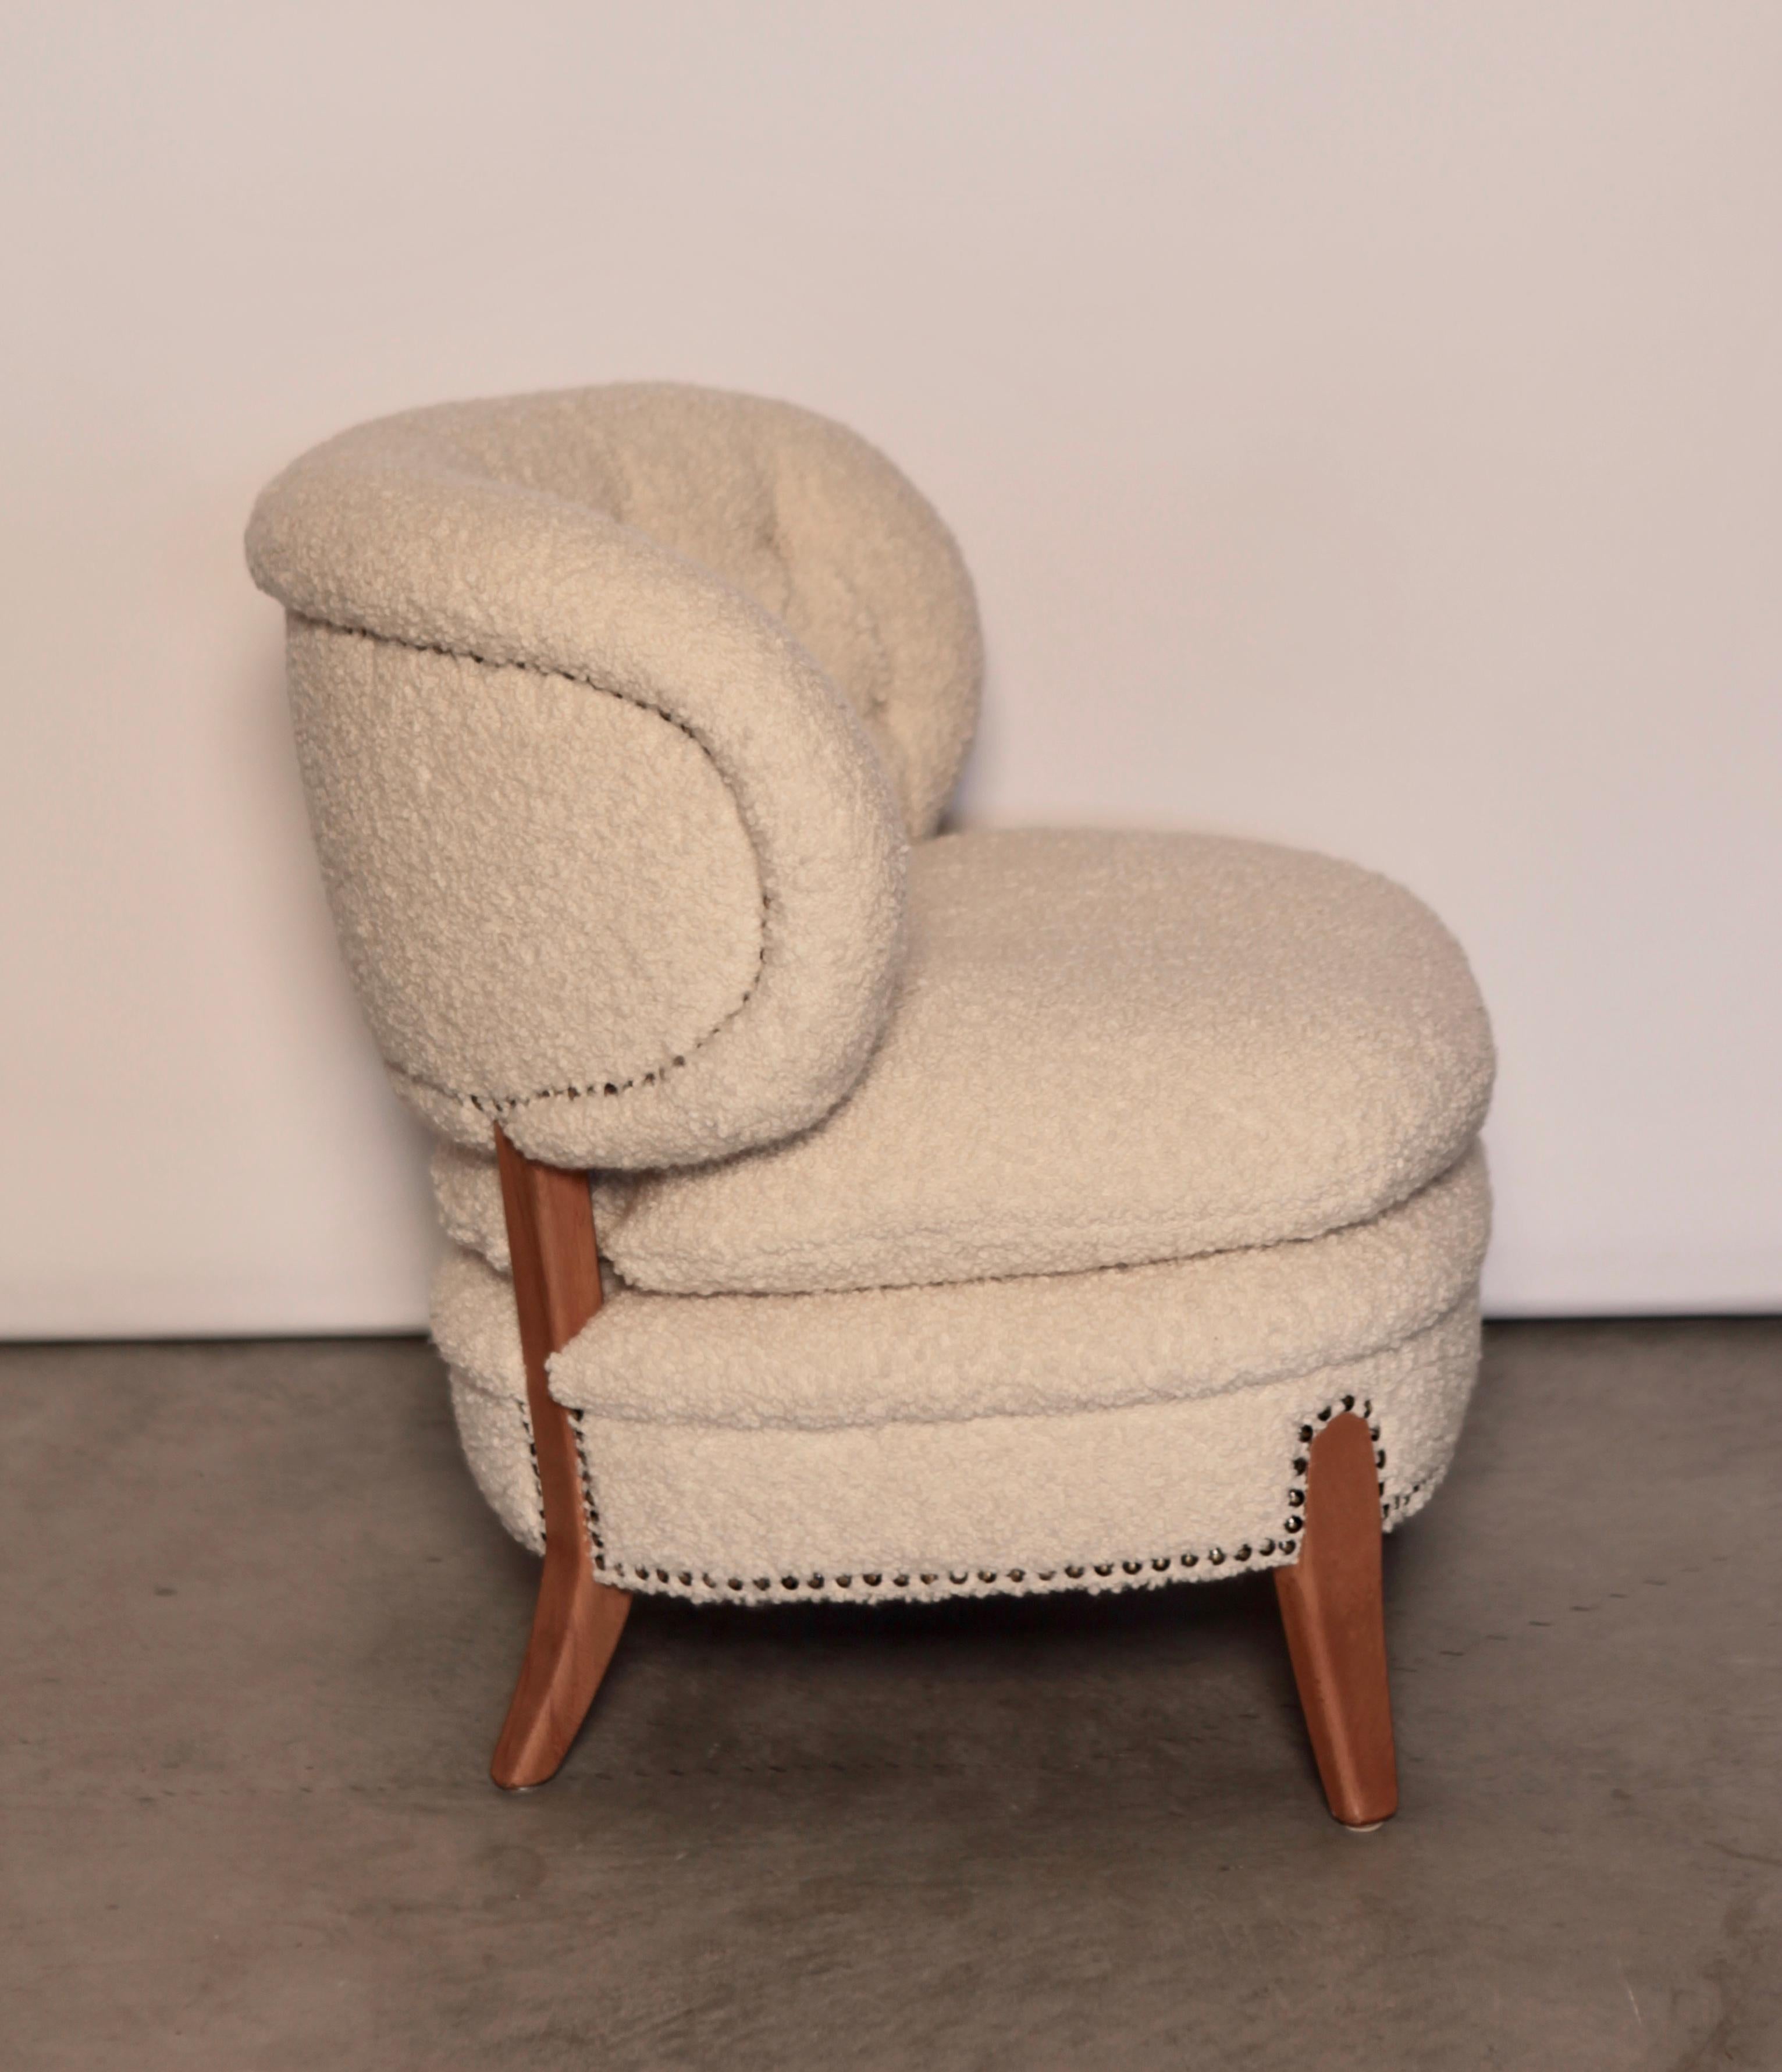 Stained Otto Schulz Easy Chair, Sweden, Produced by Boet, 1940s For Sale